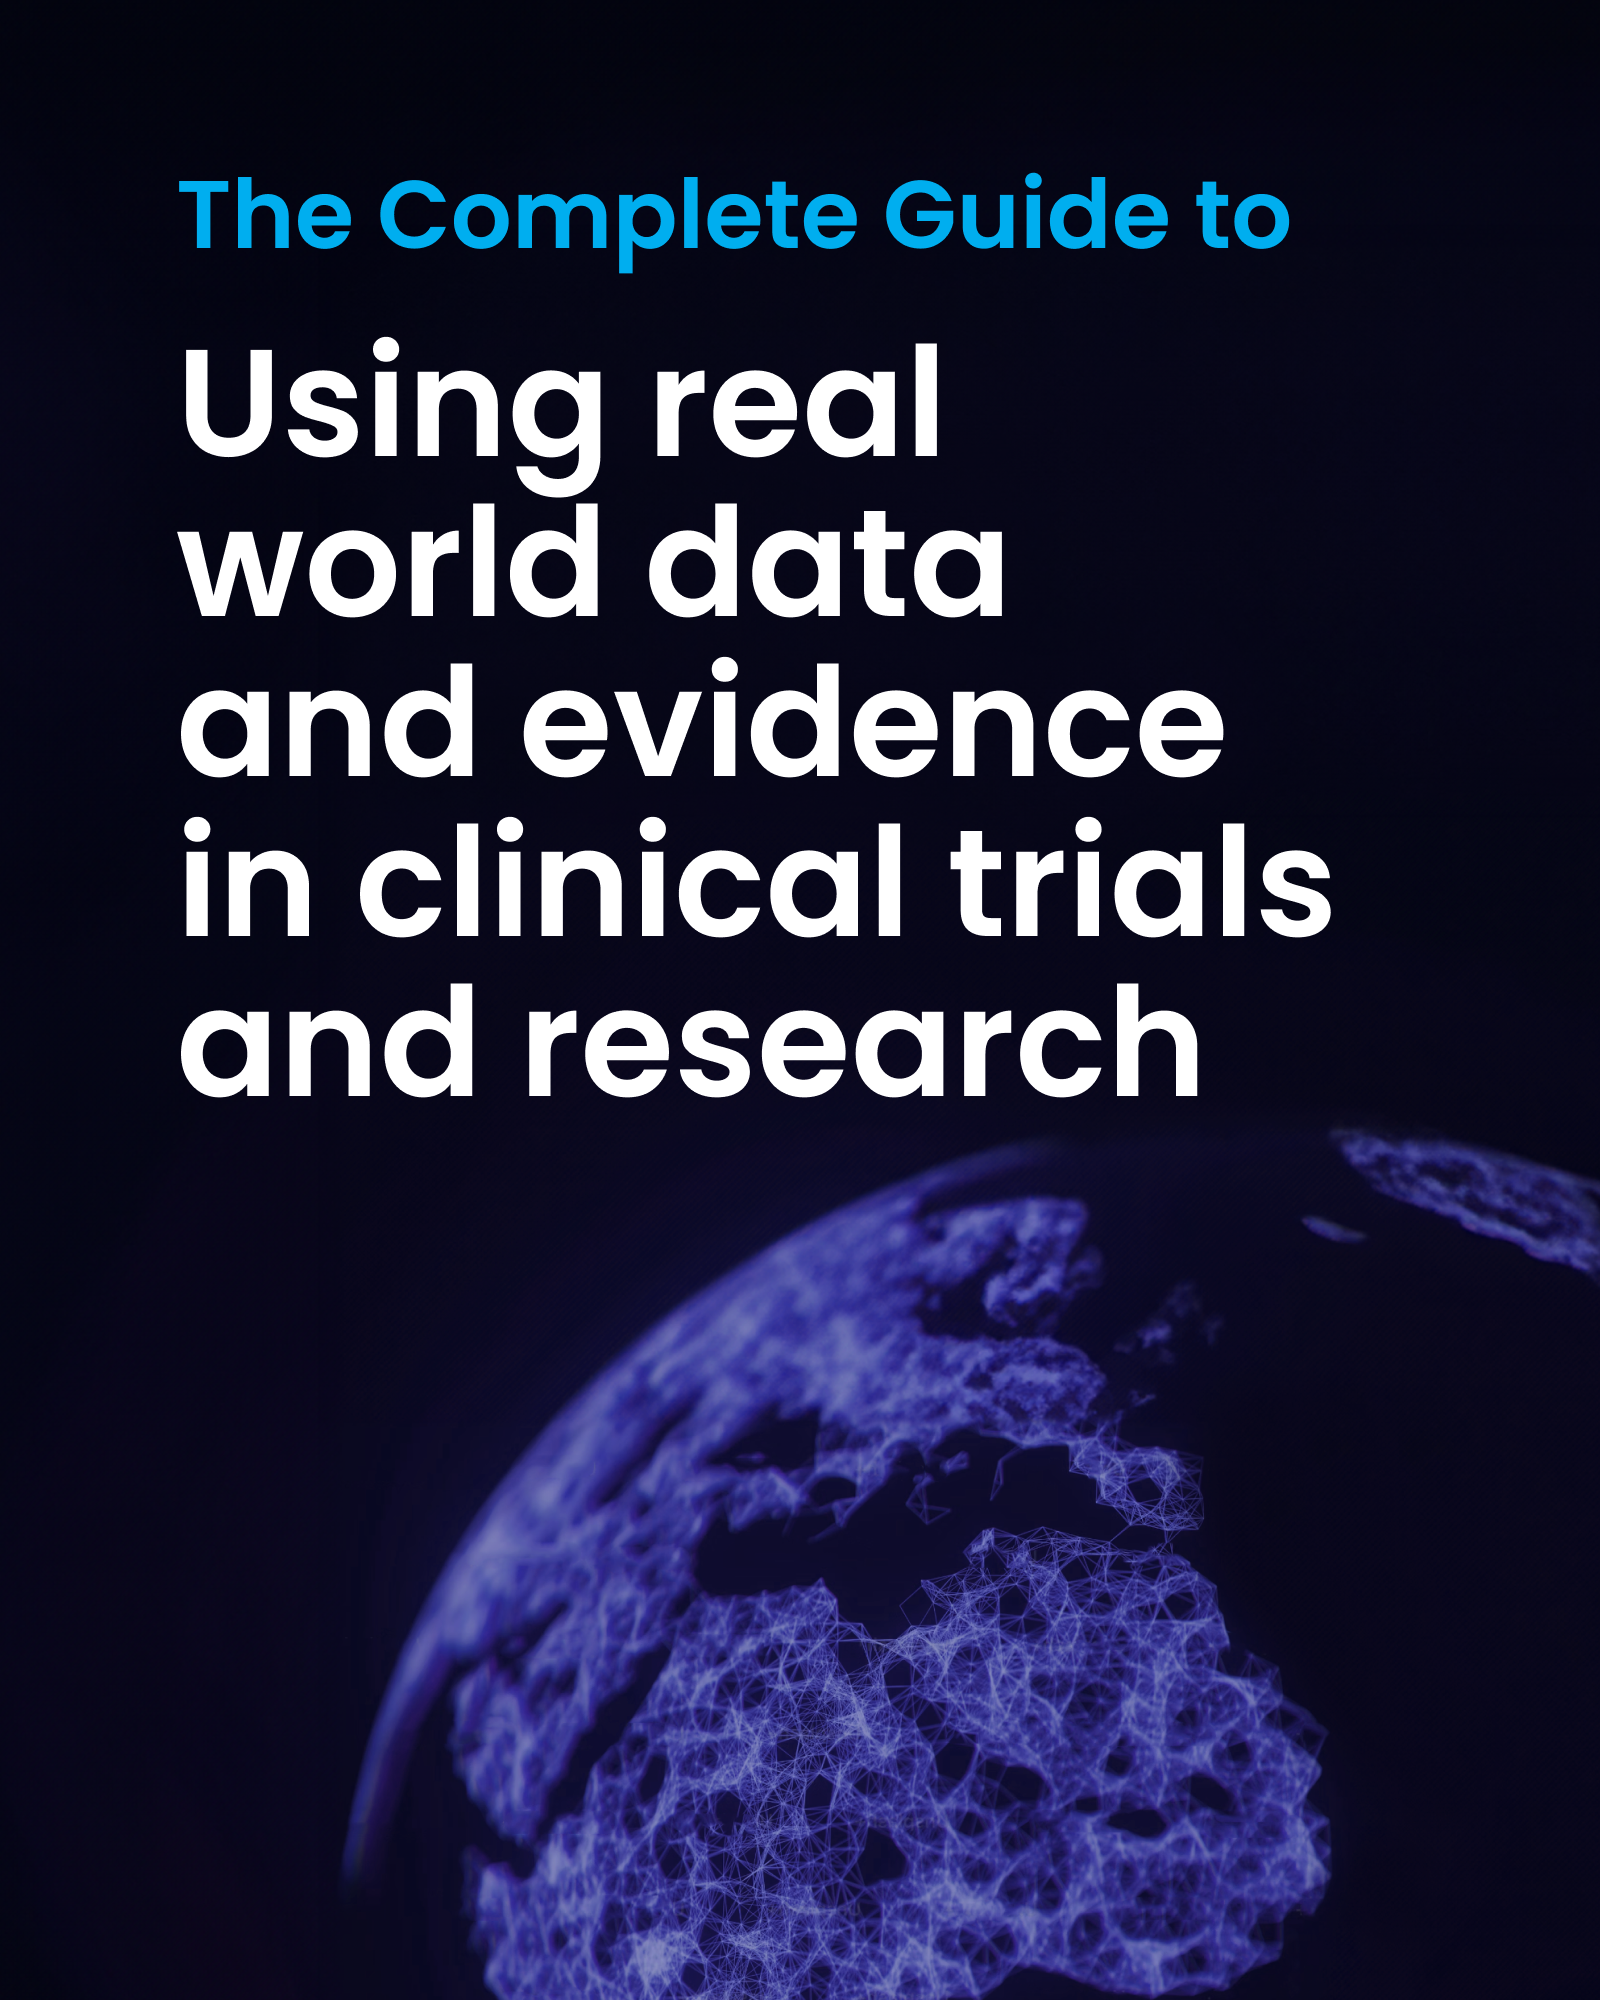 Blog_The complete guide to using real world data_mobile